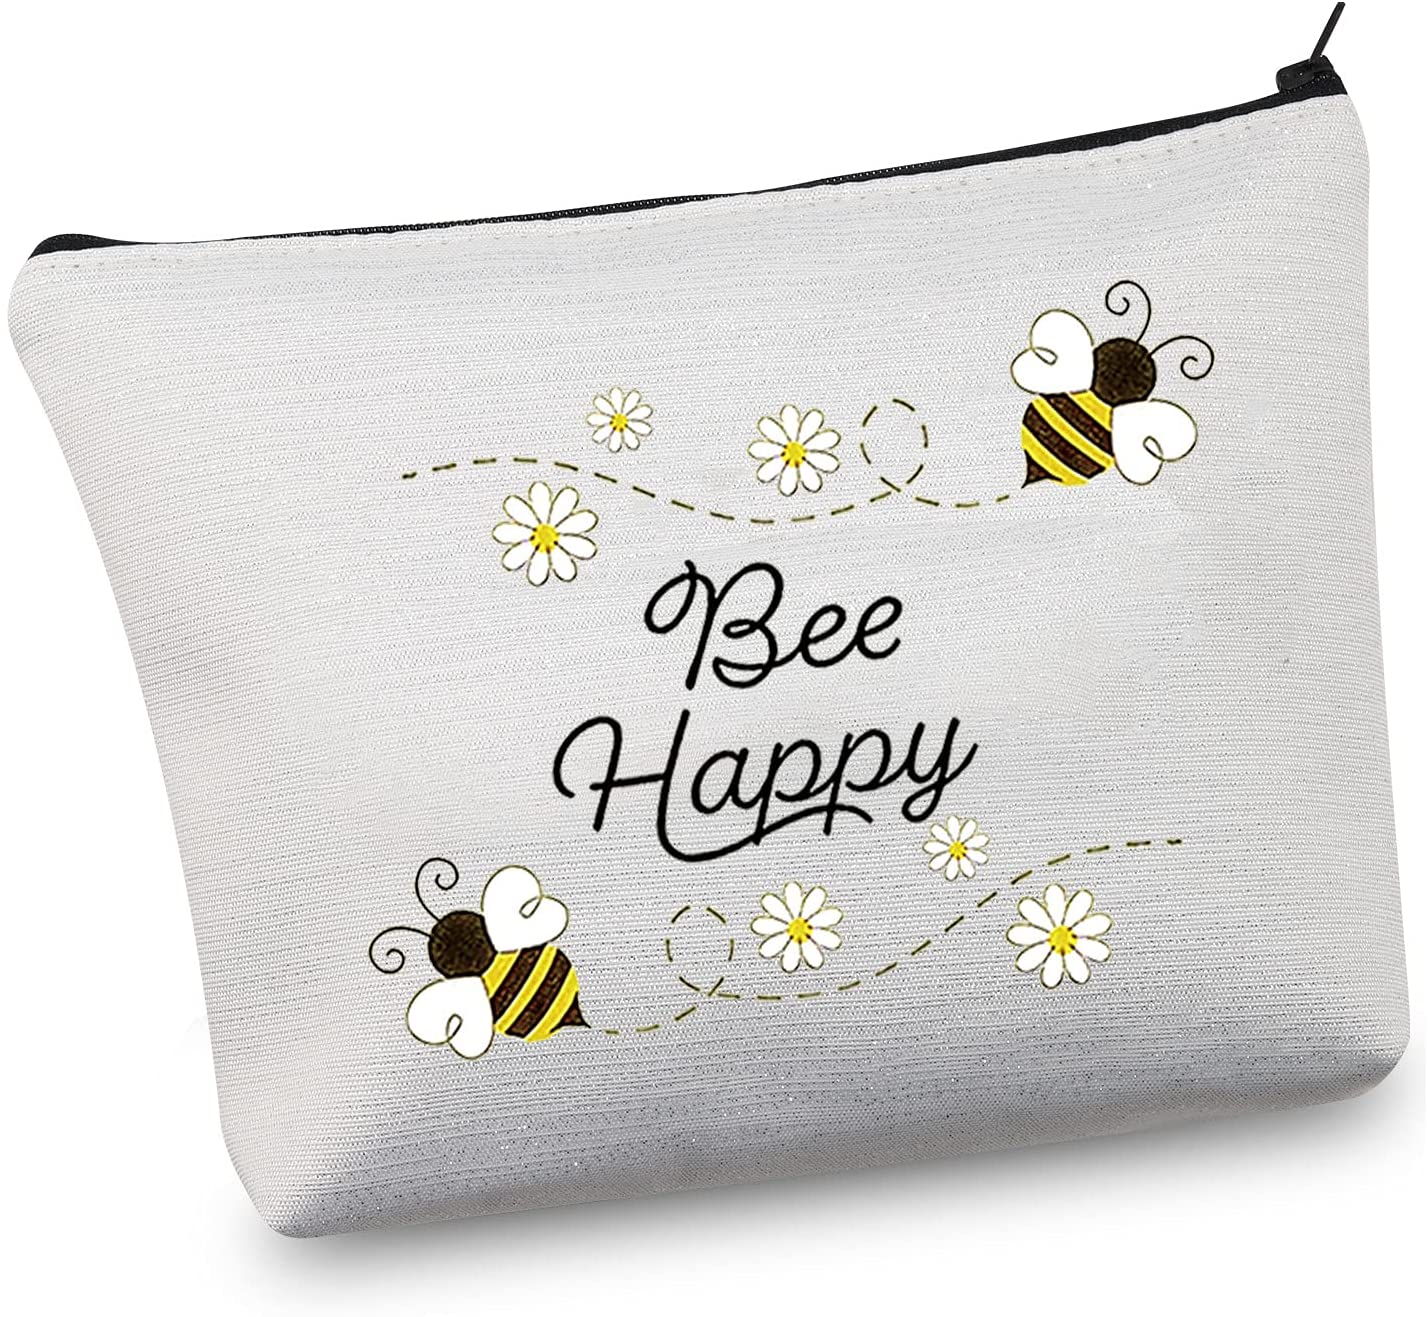 Personalized Queen Bee Gift Bee Gifts Queen Bee Gifts Bumble Bee Bee Lover  Save | eBay